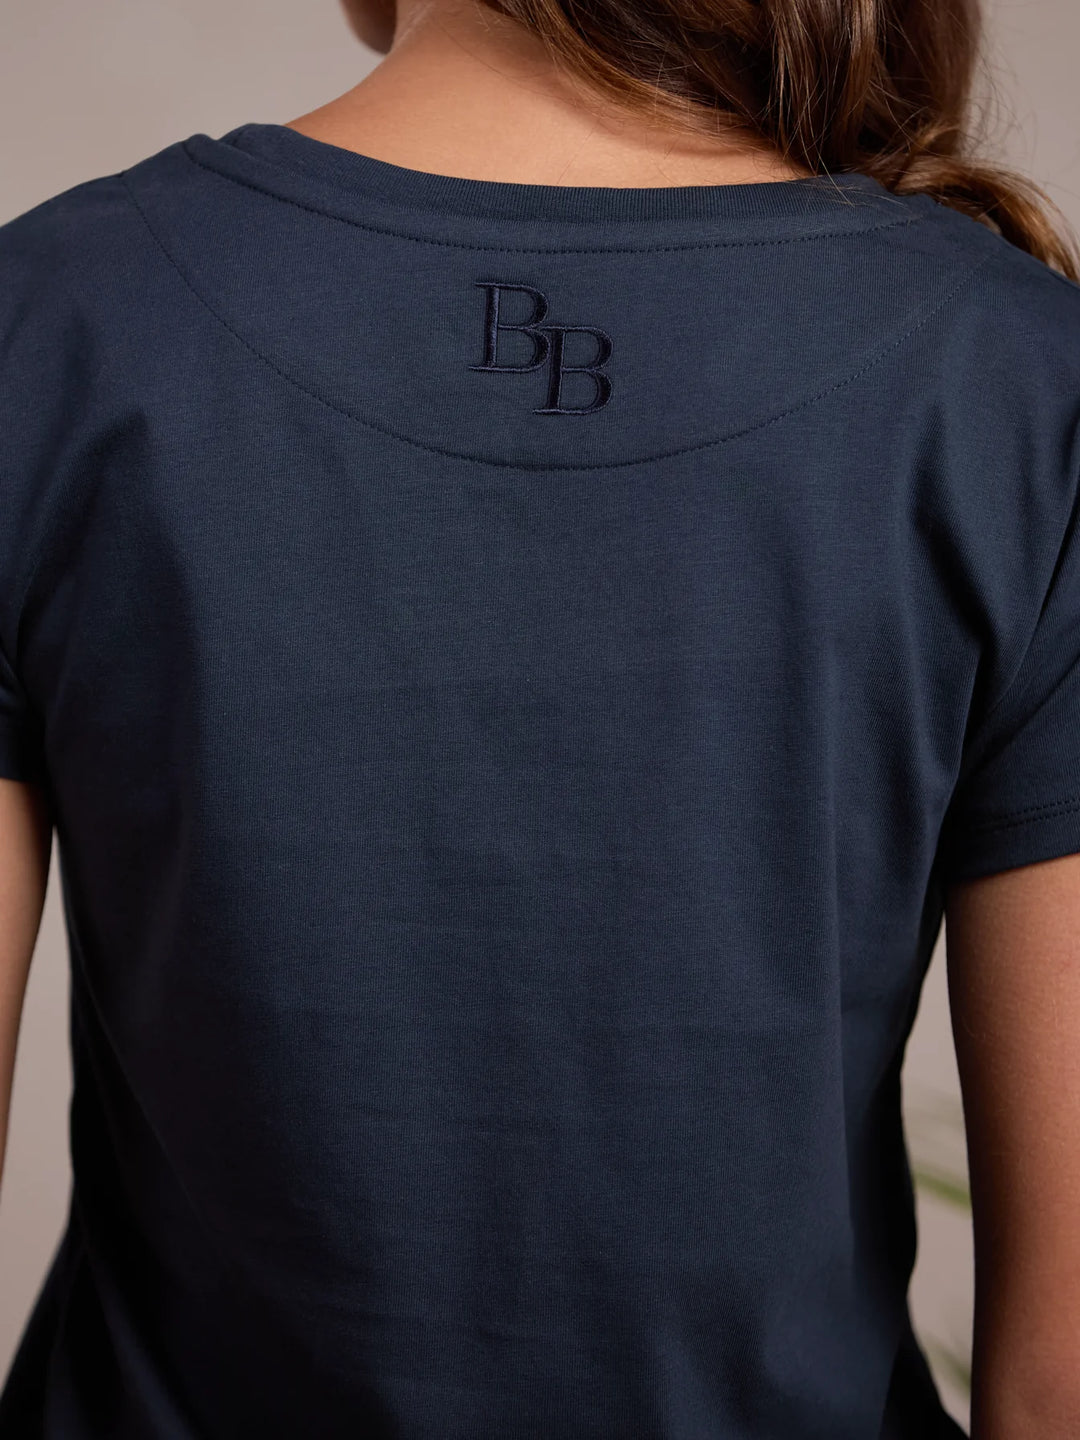 Beaumont & Bear Ladies Bolberry T-Shirt